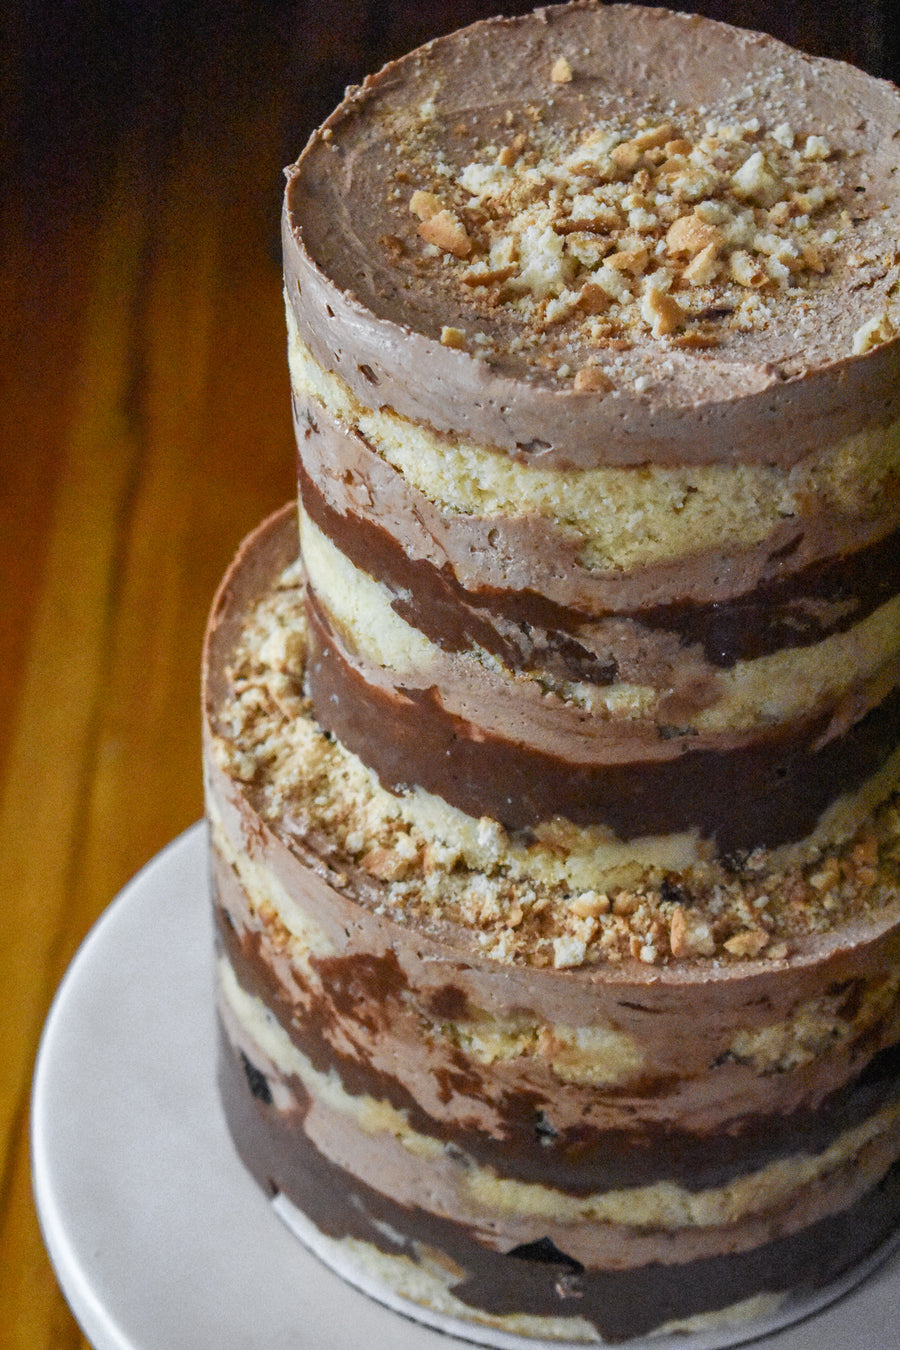 TWO TIER NUTELLA CAKE